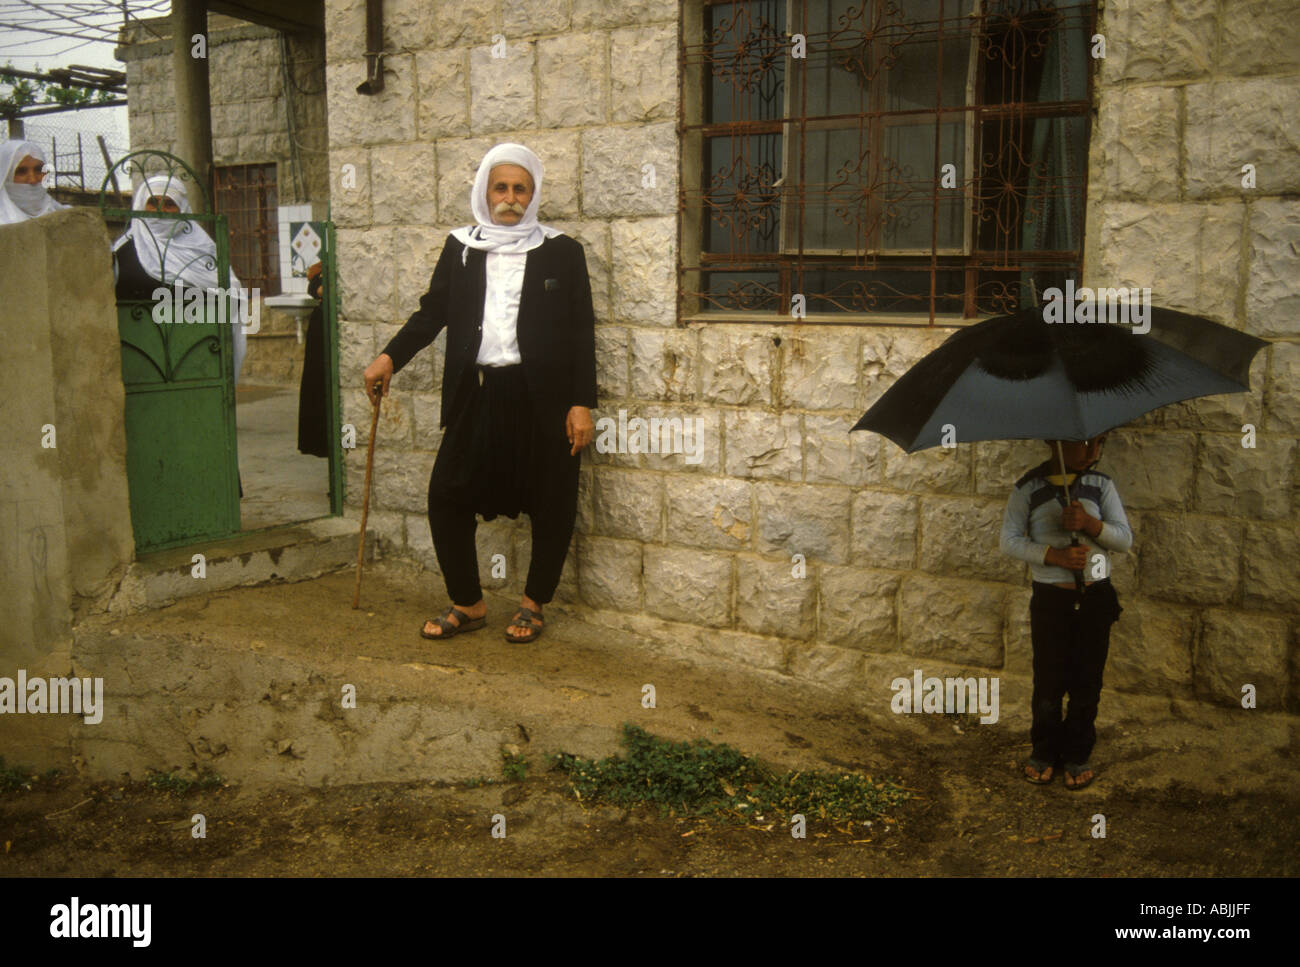 Syrian Druze community people in the village of Mas'ade, Golan Heights Israe.l 1980s 1982 HOMER SYKES Stock Photo